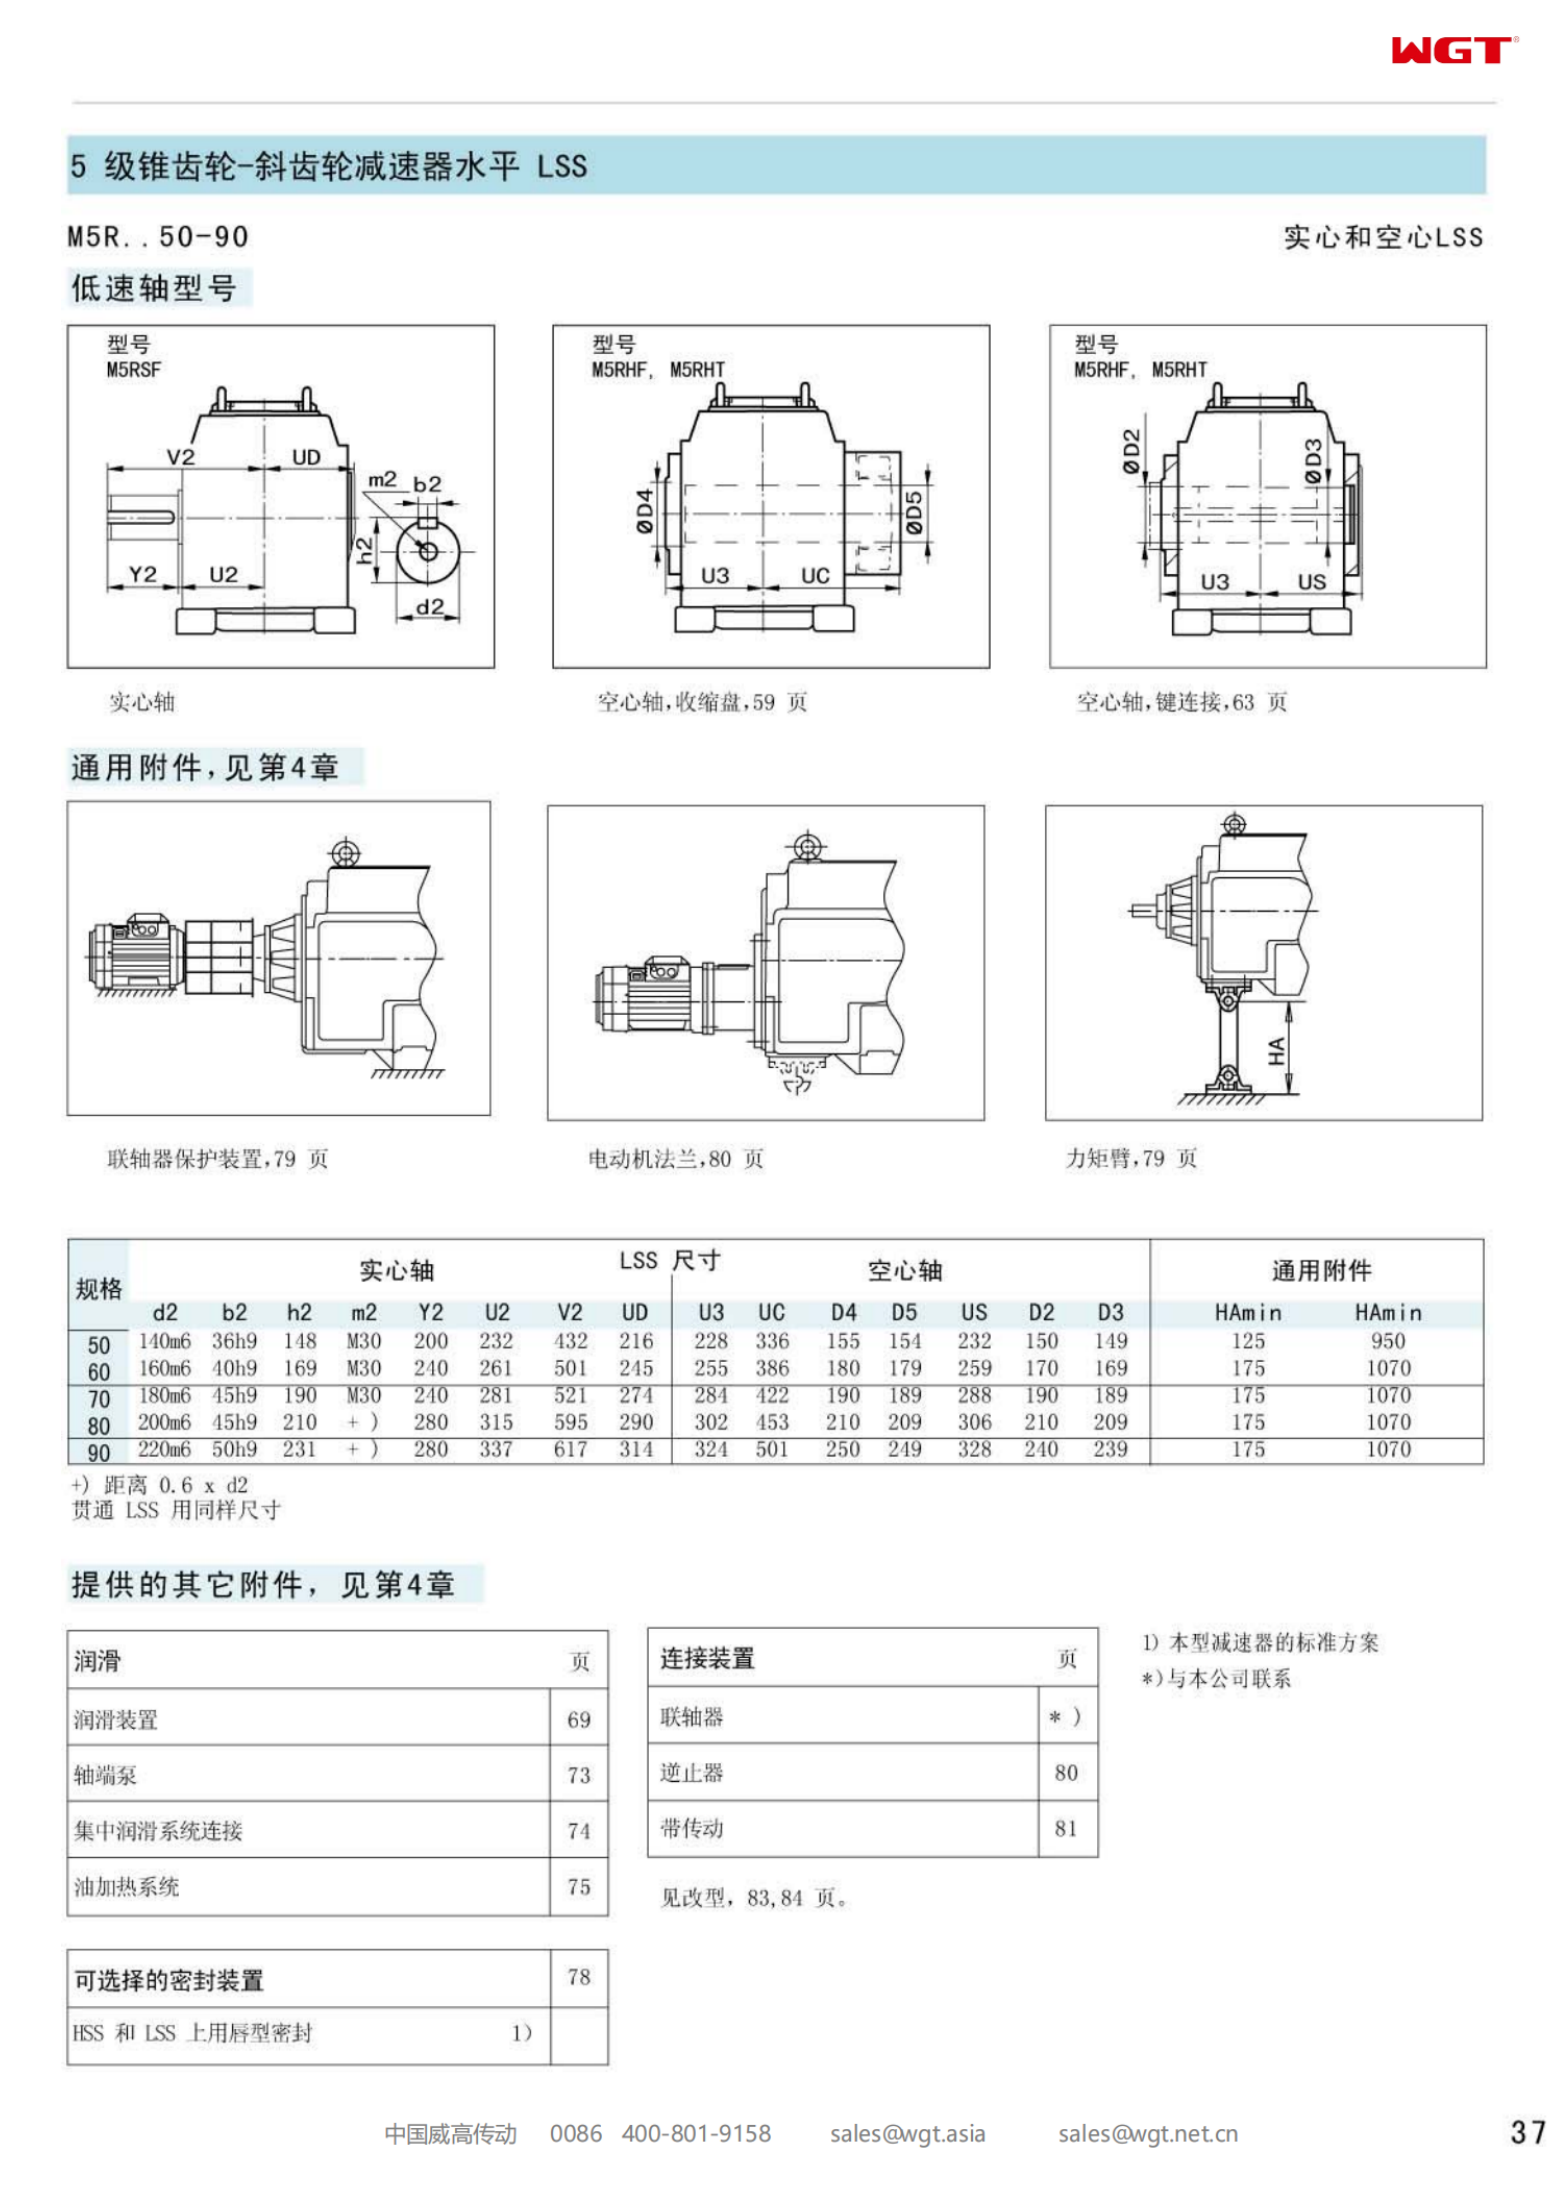 M2PVSF30 Replace_SEW_M_Series Gearbox